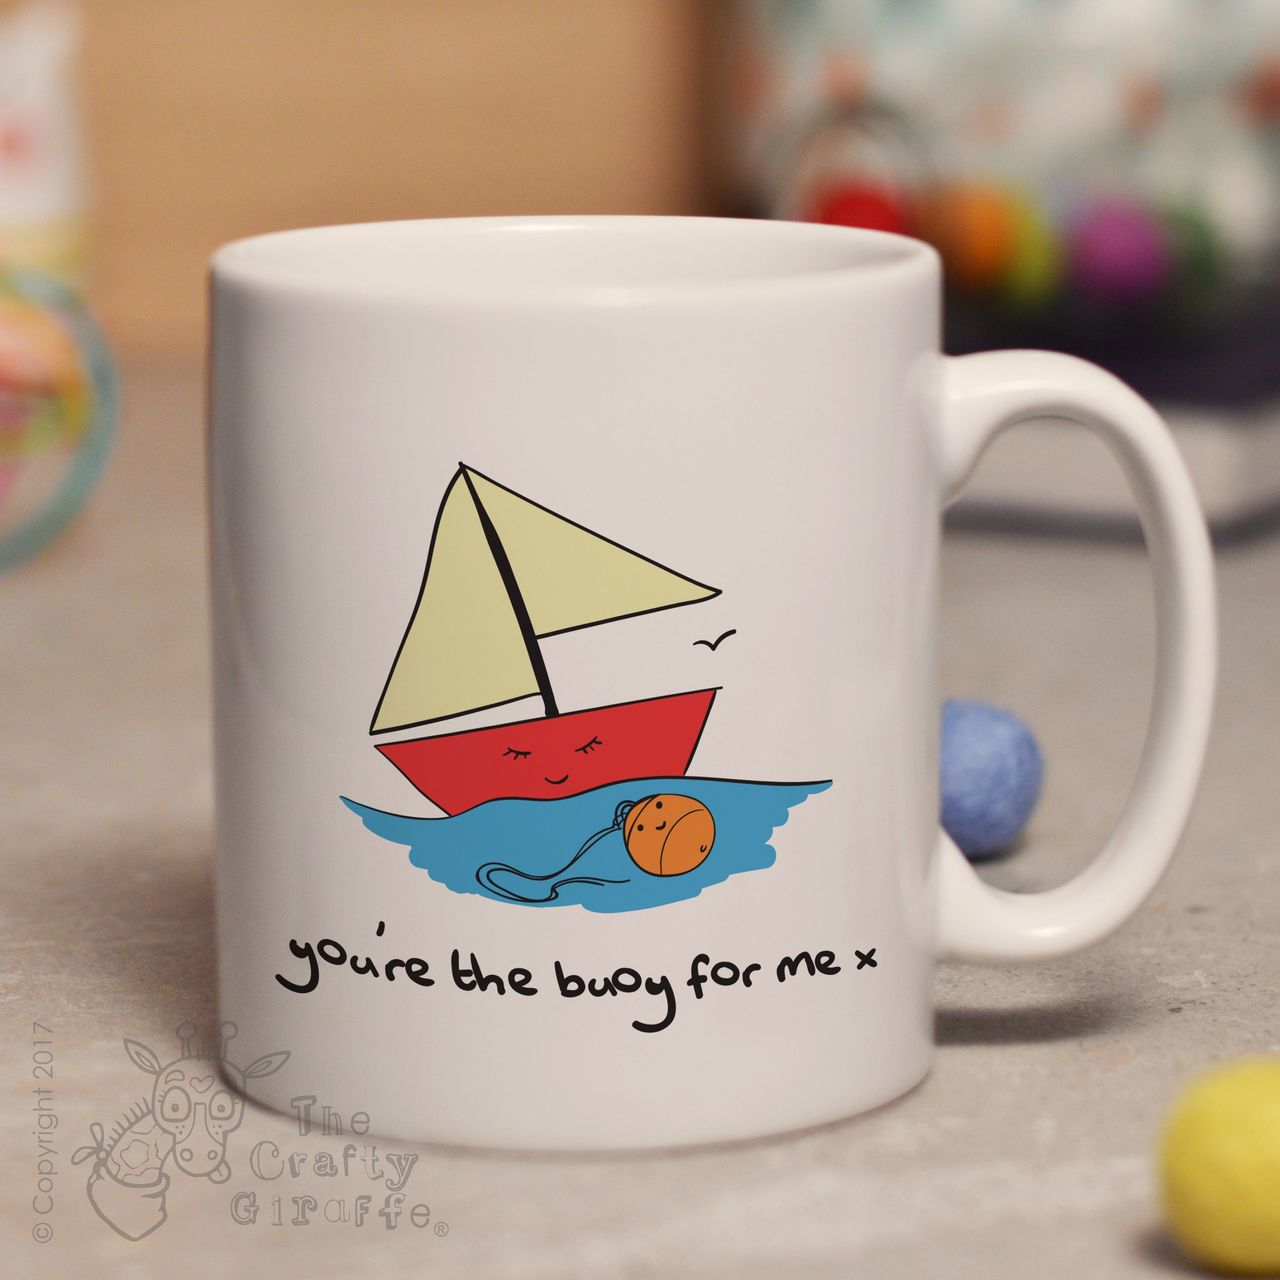 You’re the only buoy for me mug